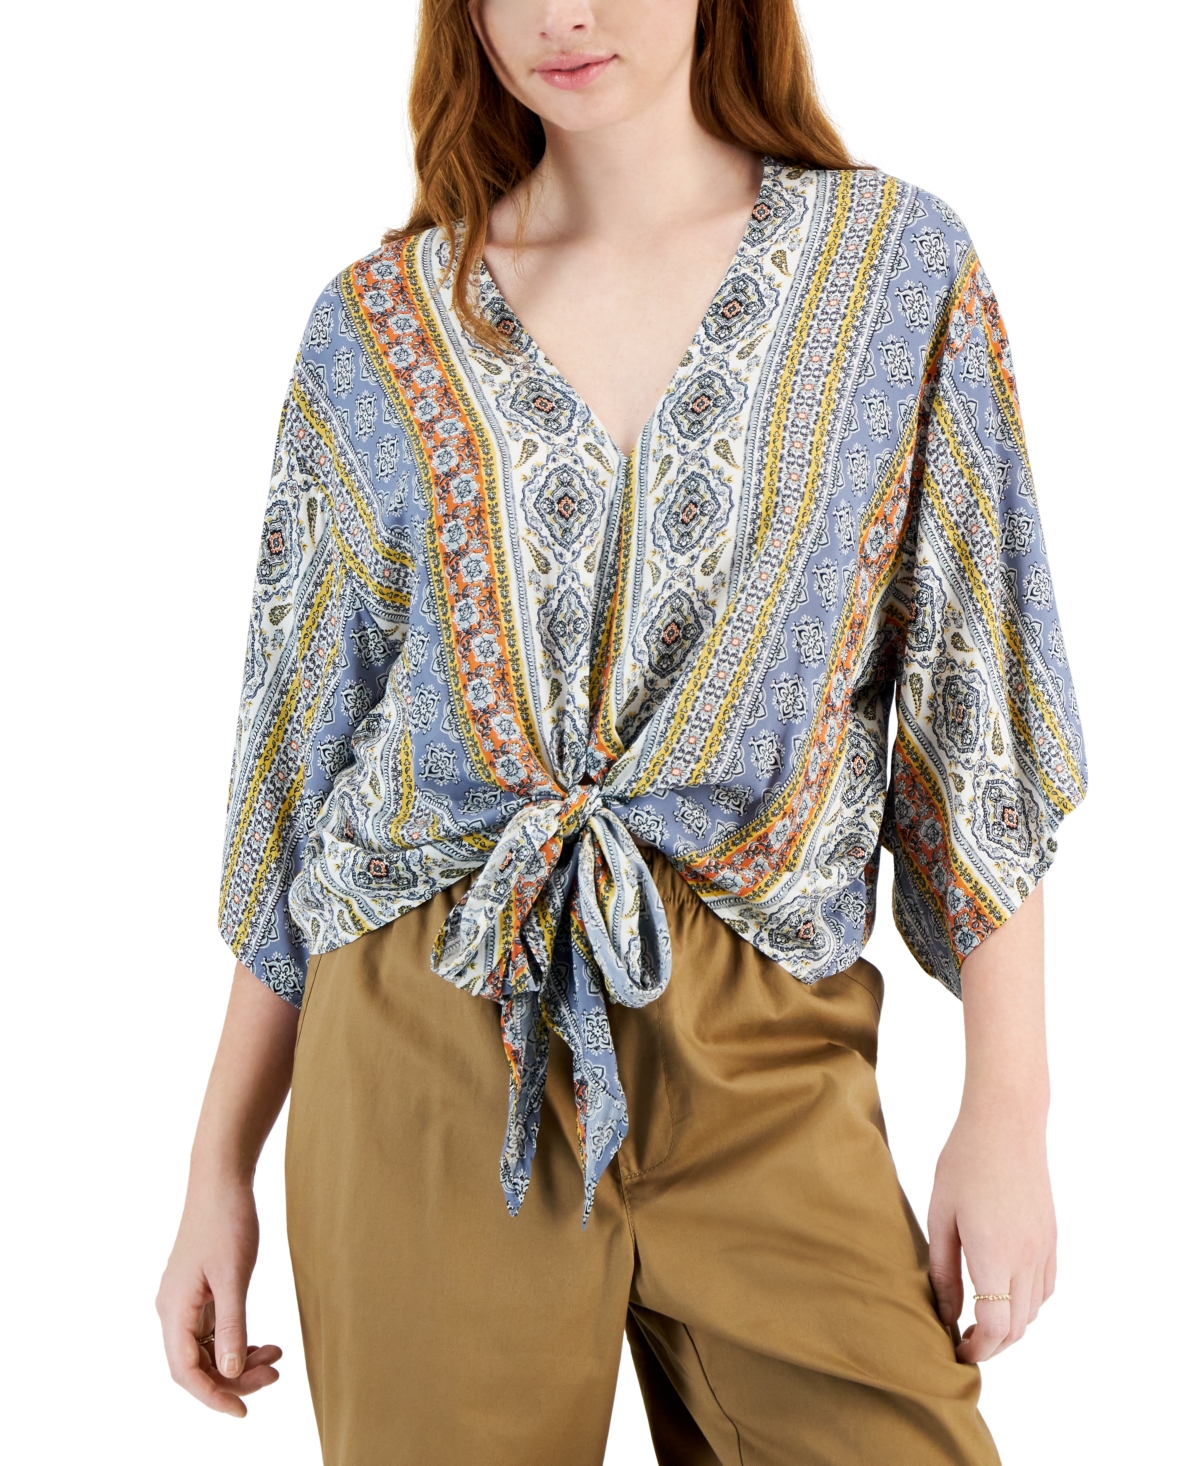 Juniors' Printed Tie-Front Top - New Blue Boho